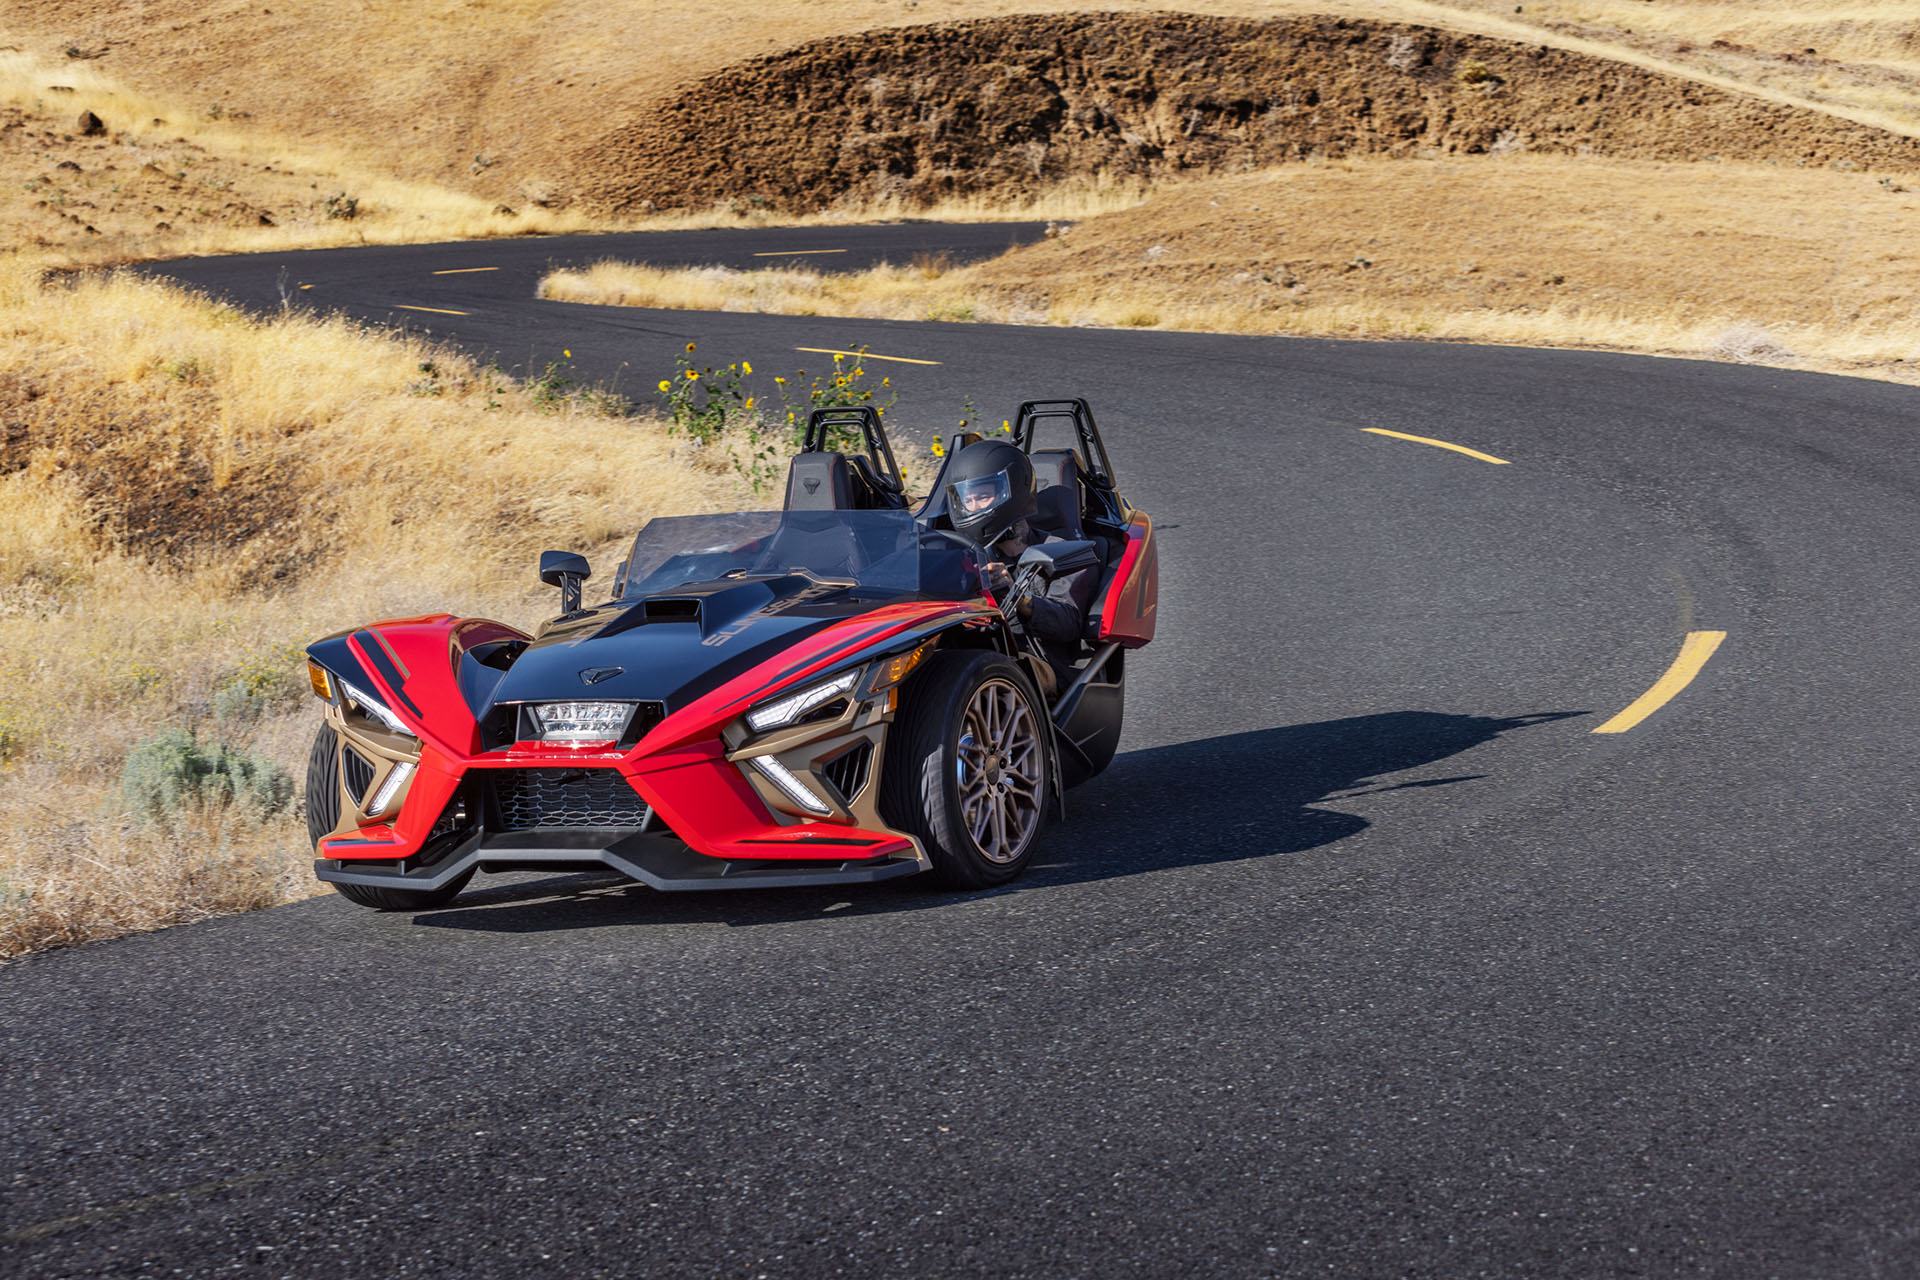 2022 Slingshot Signature Limited Edition in Tyrone, Pennsylvania - Photo 5